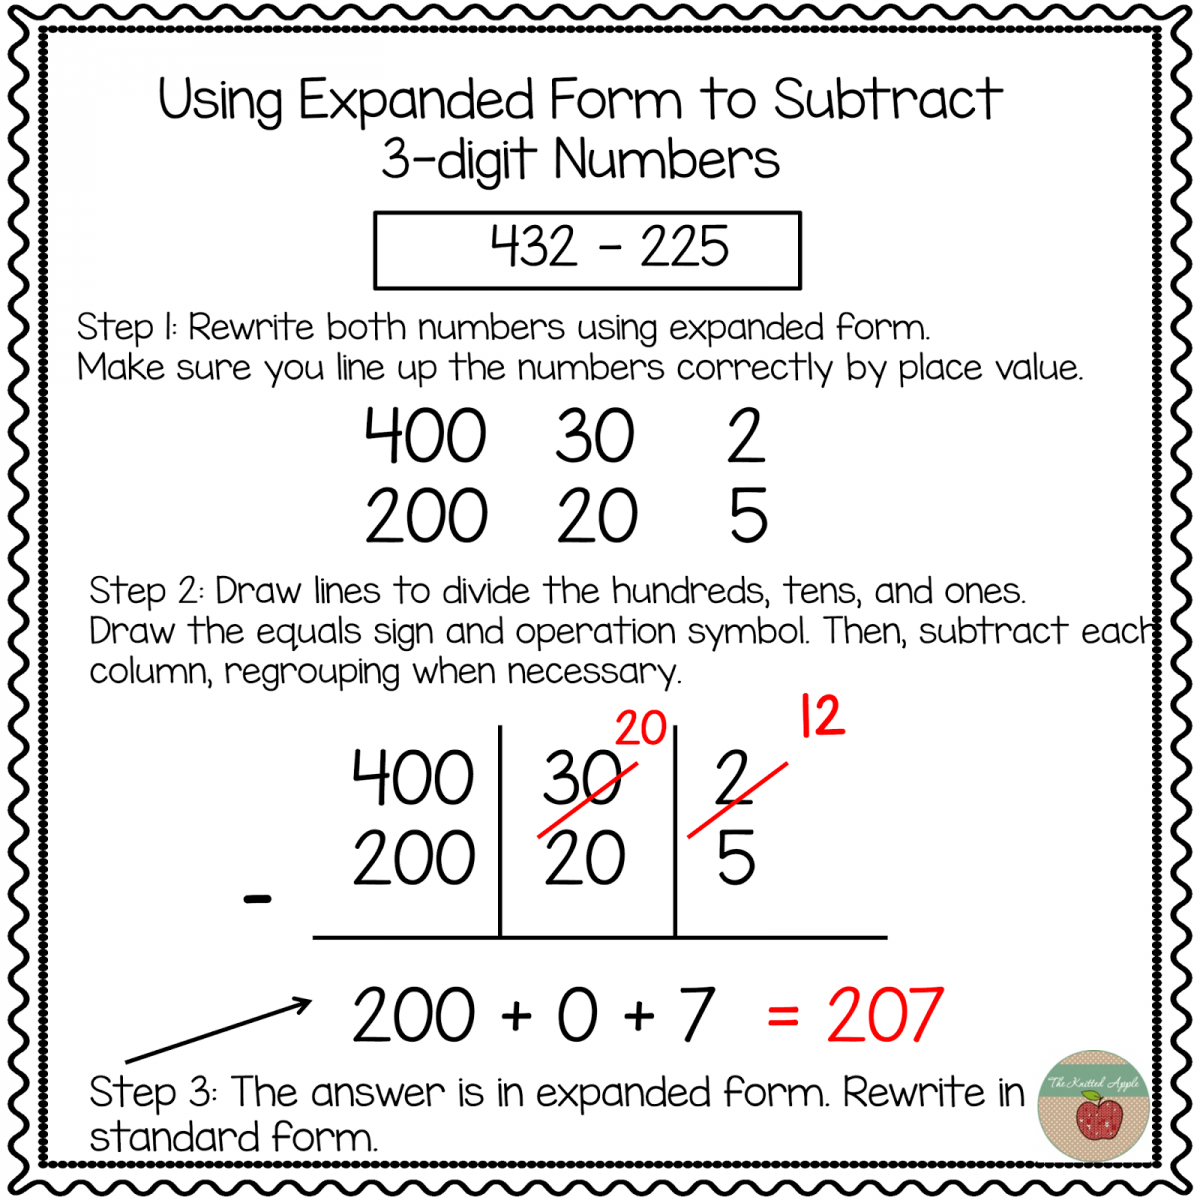 convert-to-expanded-form-sheet-4-answers-in-2020-2nd-grade-math-expanded-form-activity